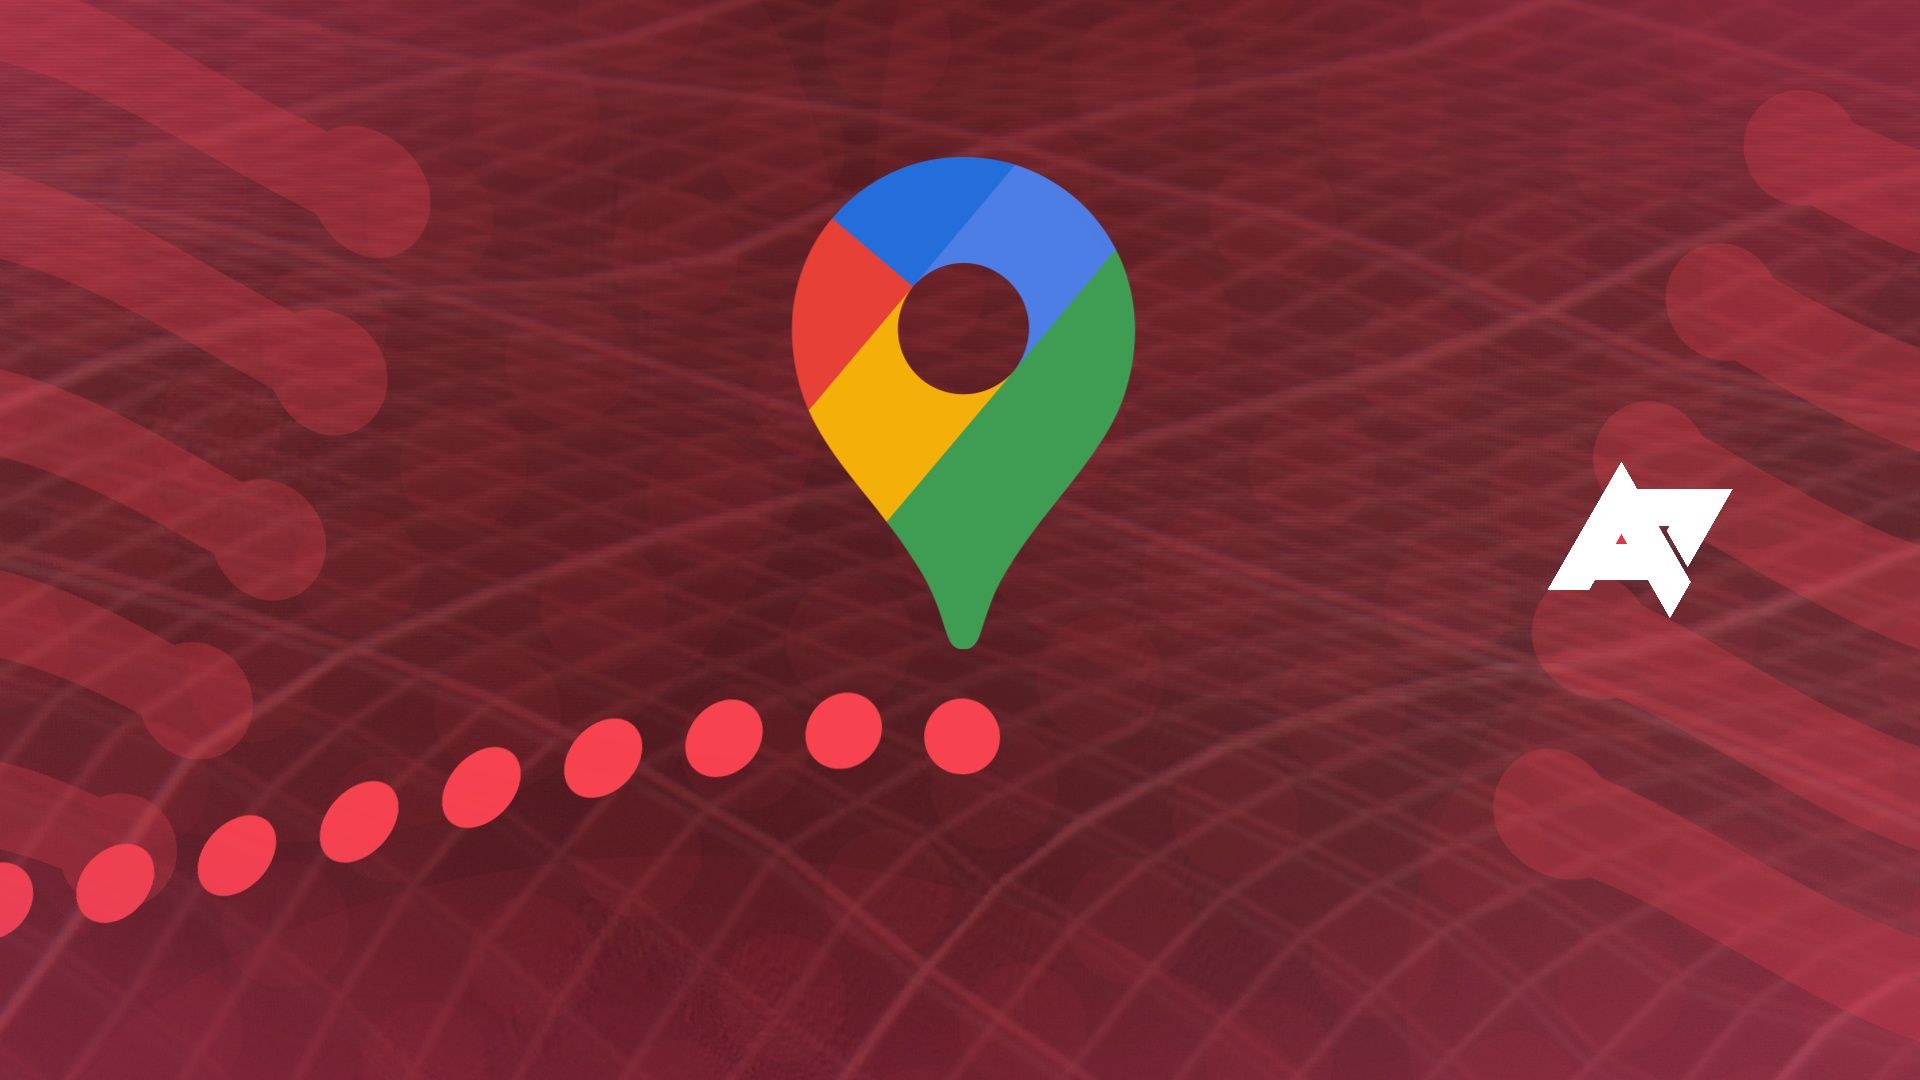 Here's our first look at Google Maps' new generative AI